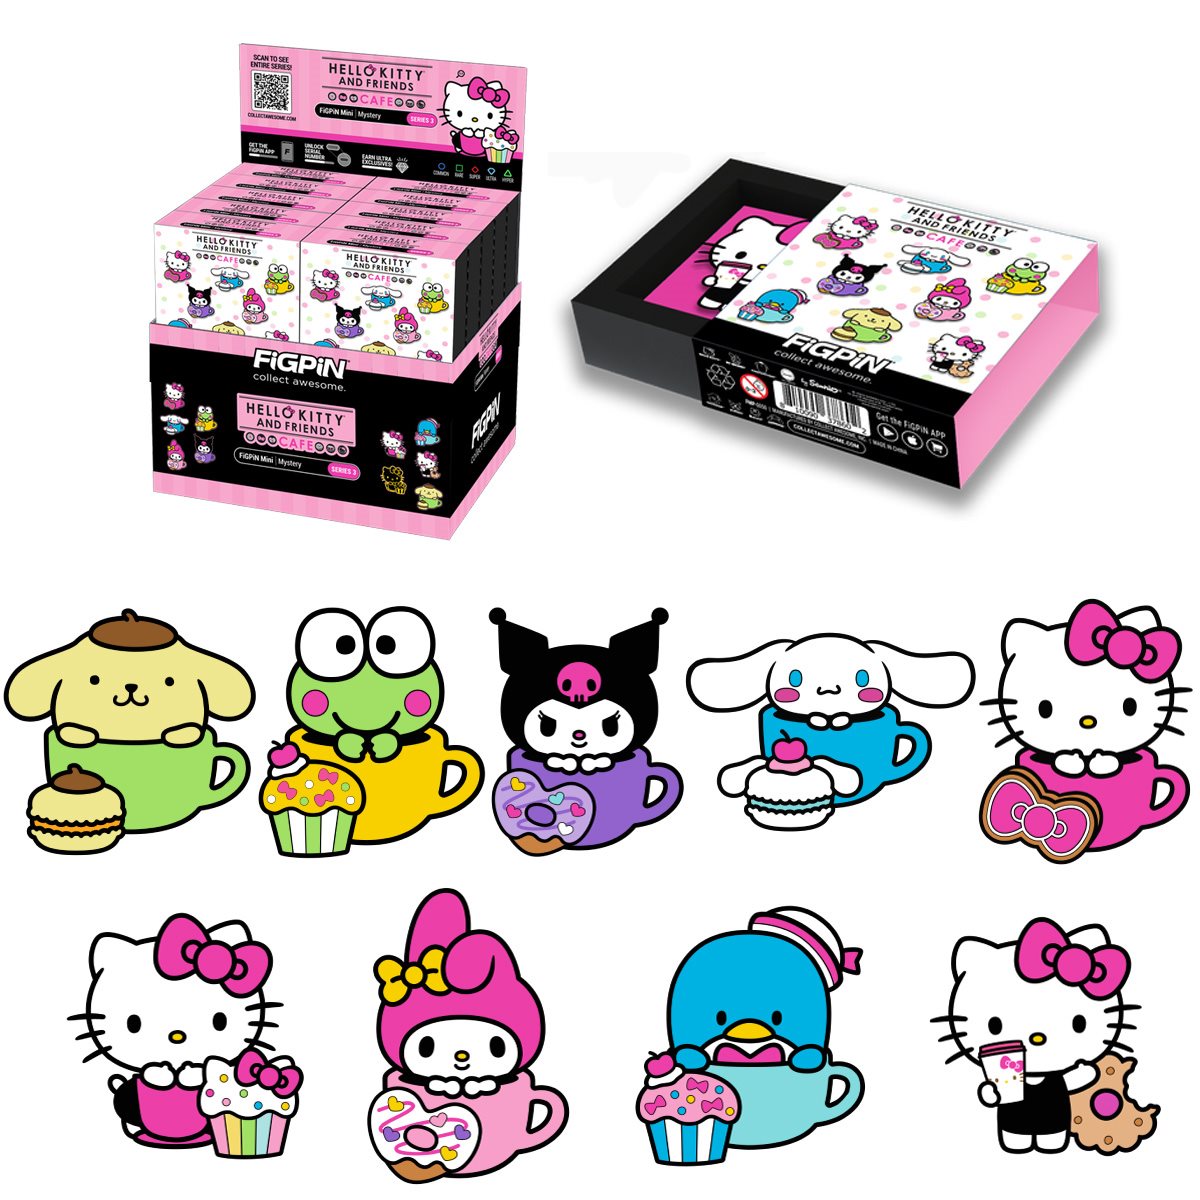 Sanrio Iconic Series - Hello Kitty 3 Limited Edition 300 Pin